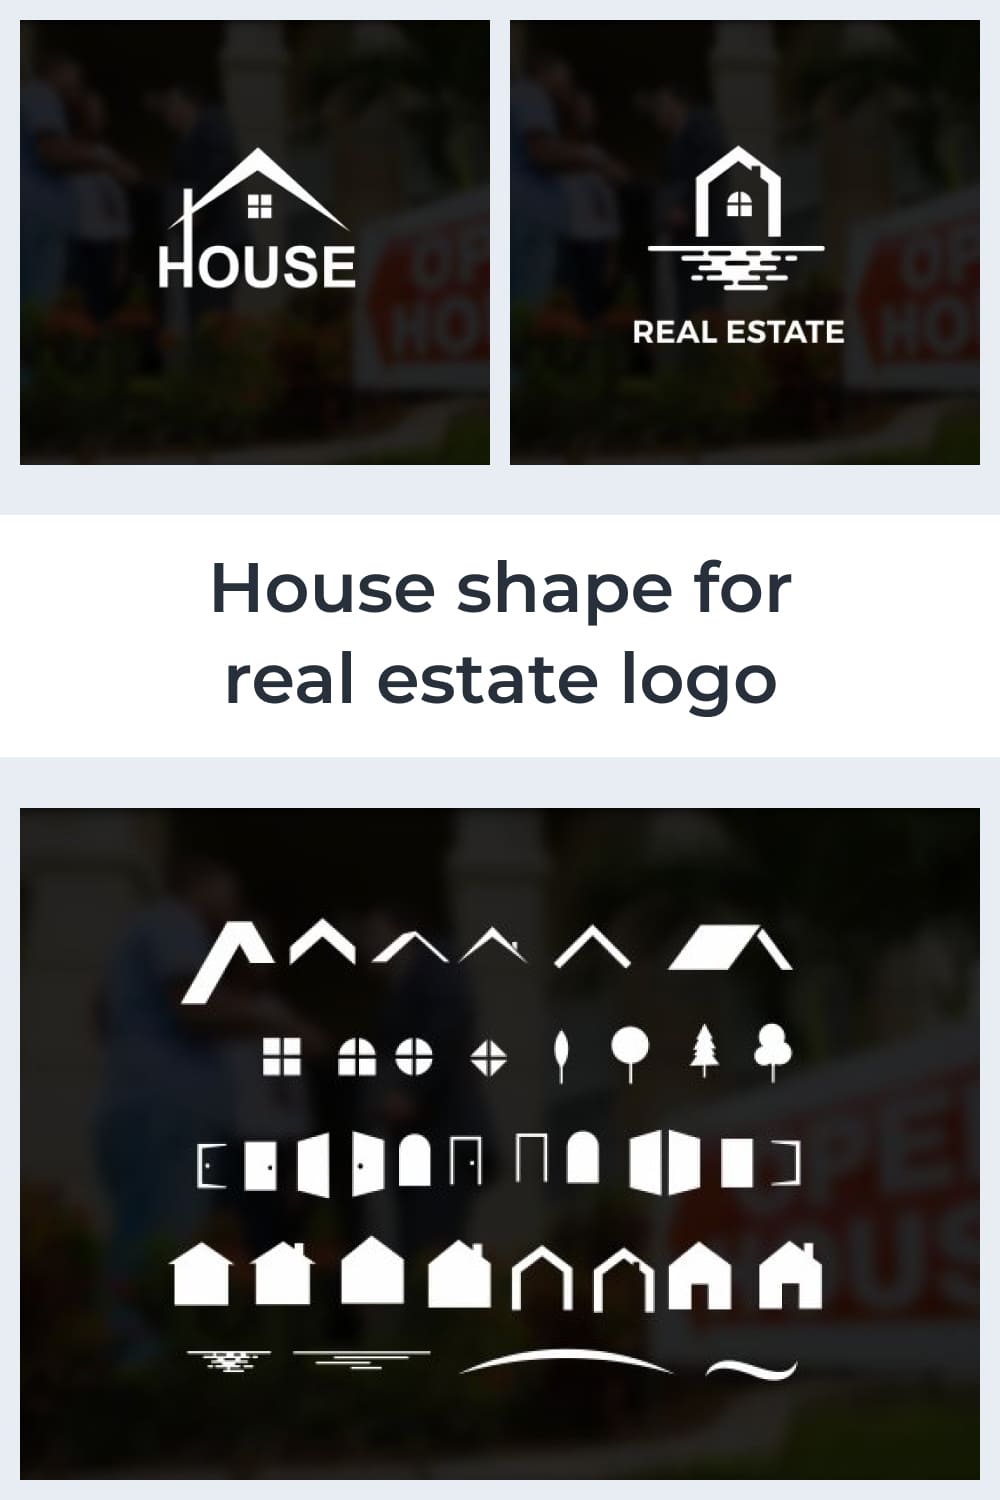 This set of real estate or house Shapes and element, can be easily used in creating extraordinary logos.